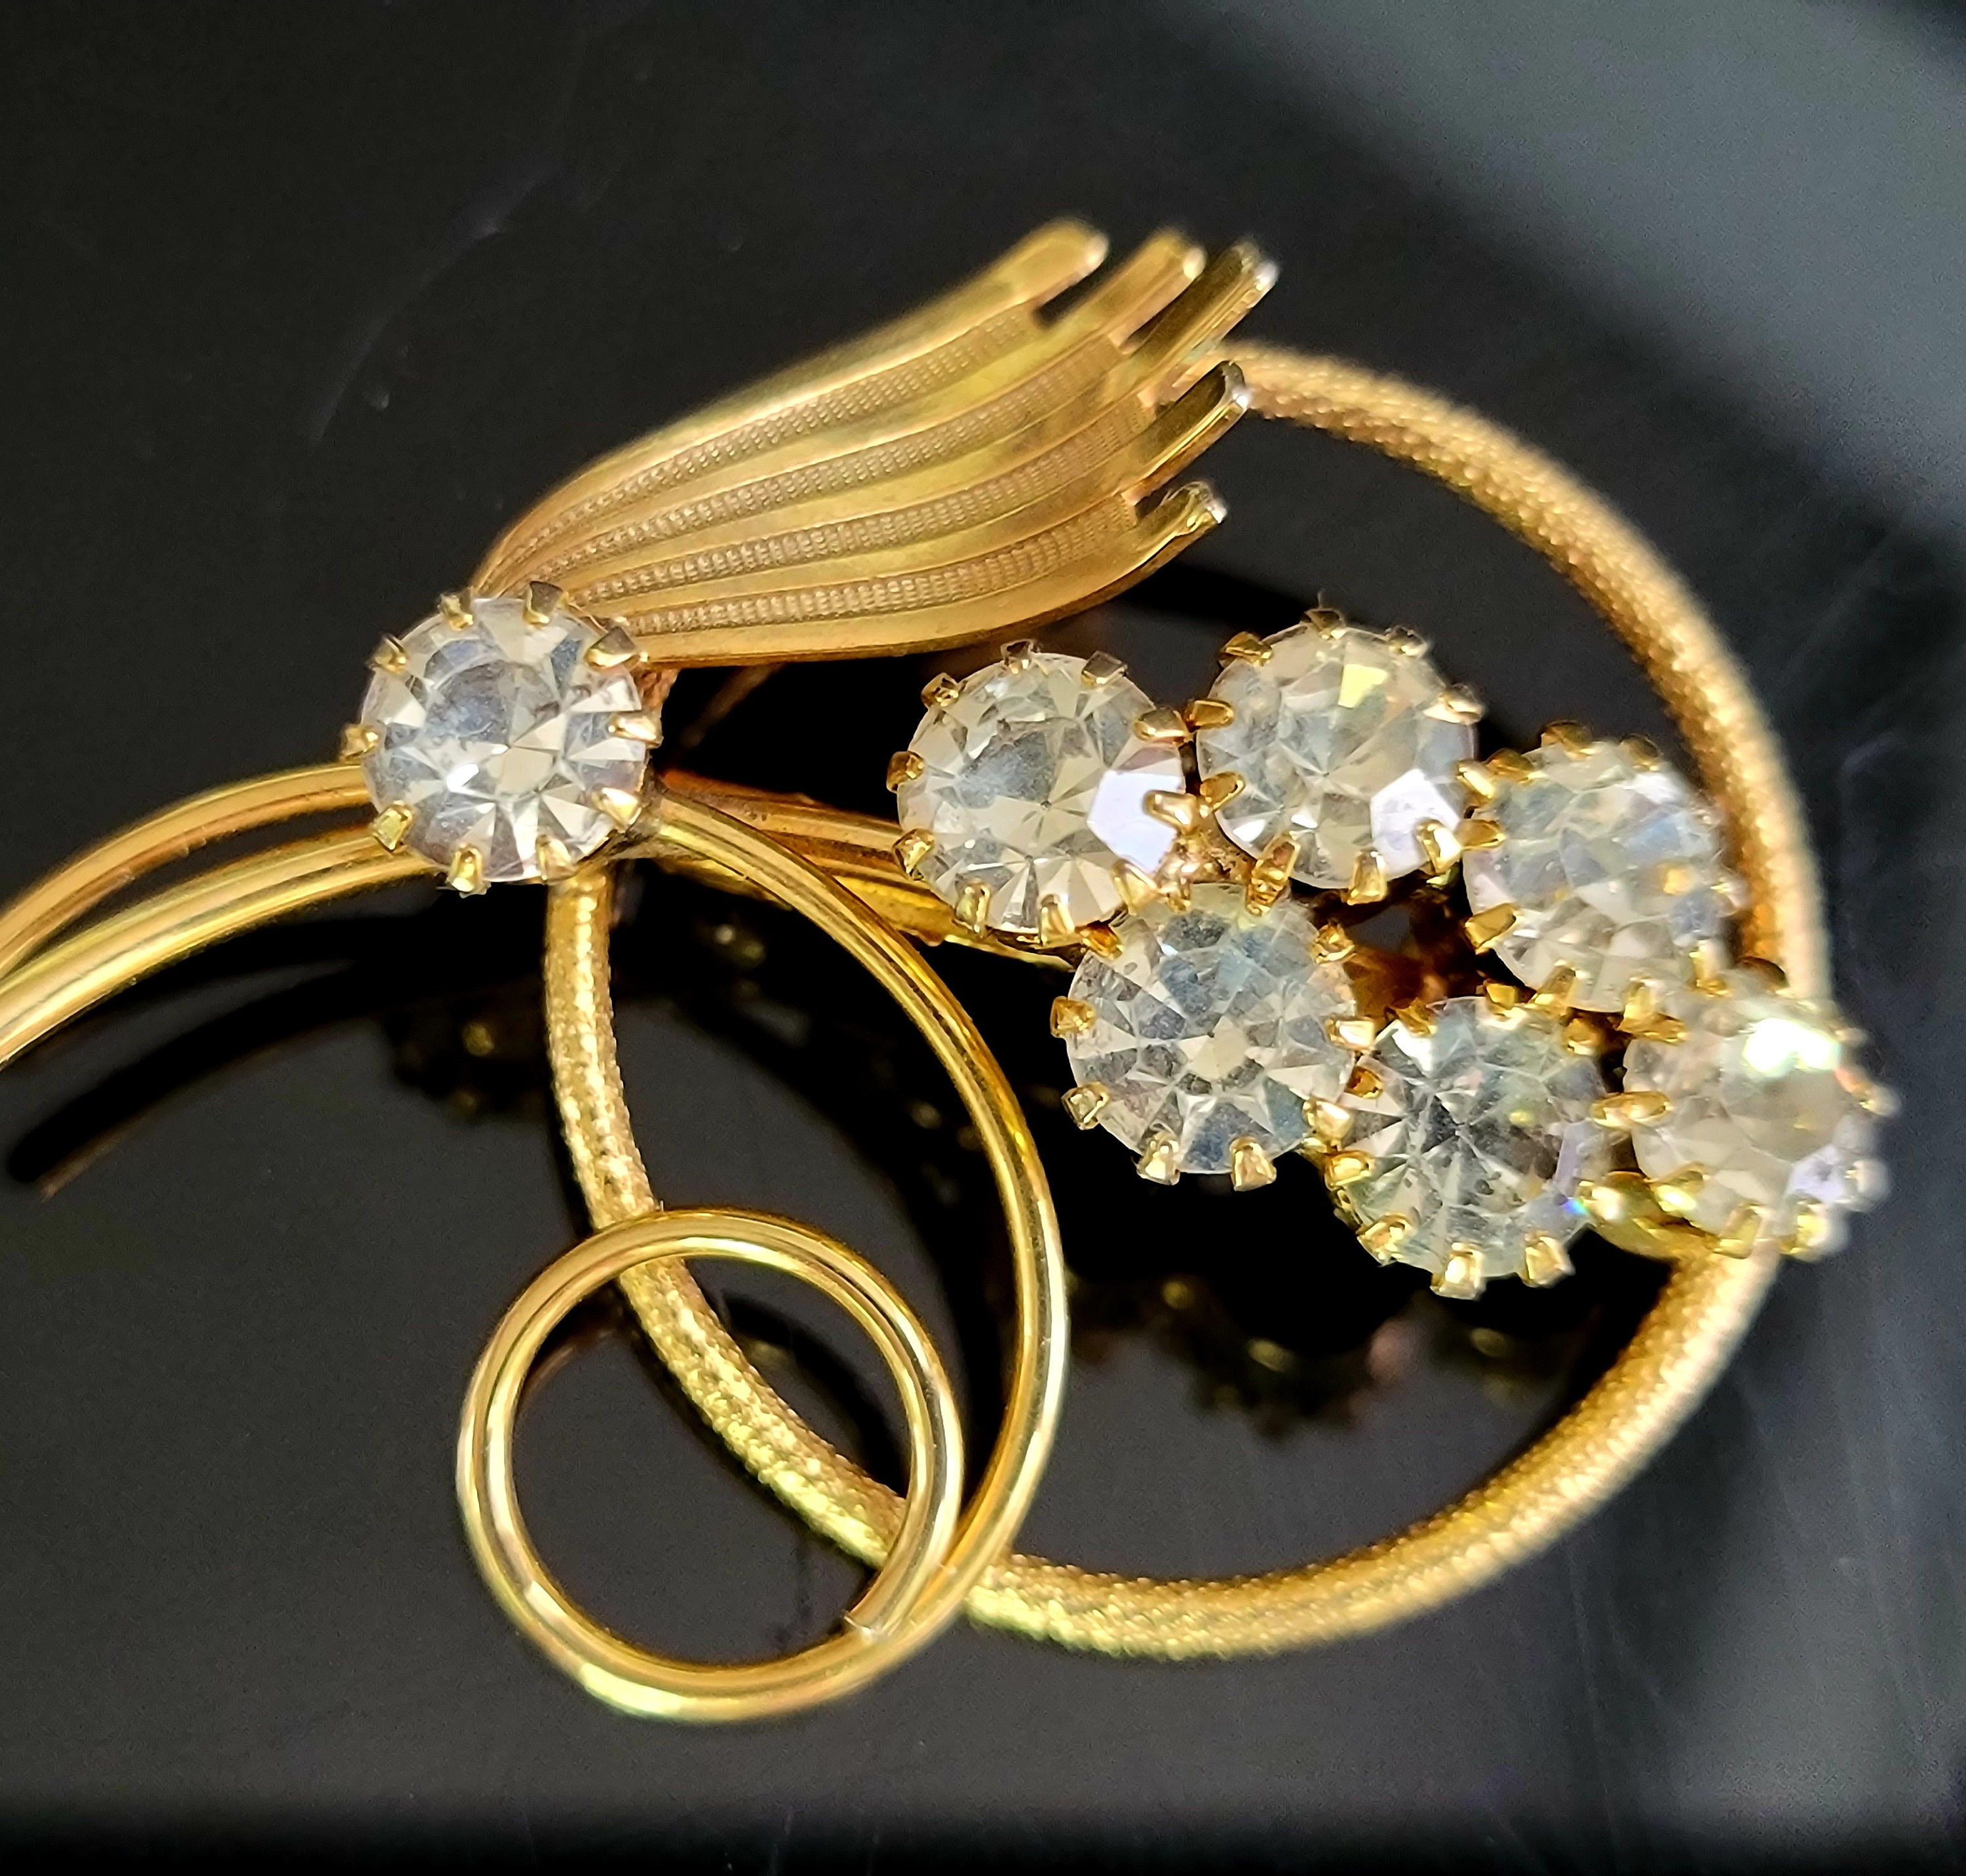 Vintage Crystal Flower Brooch Jewelry Zircon Brooches for Women Accessories